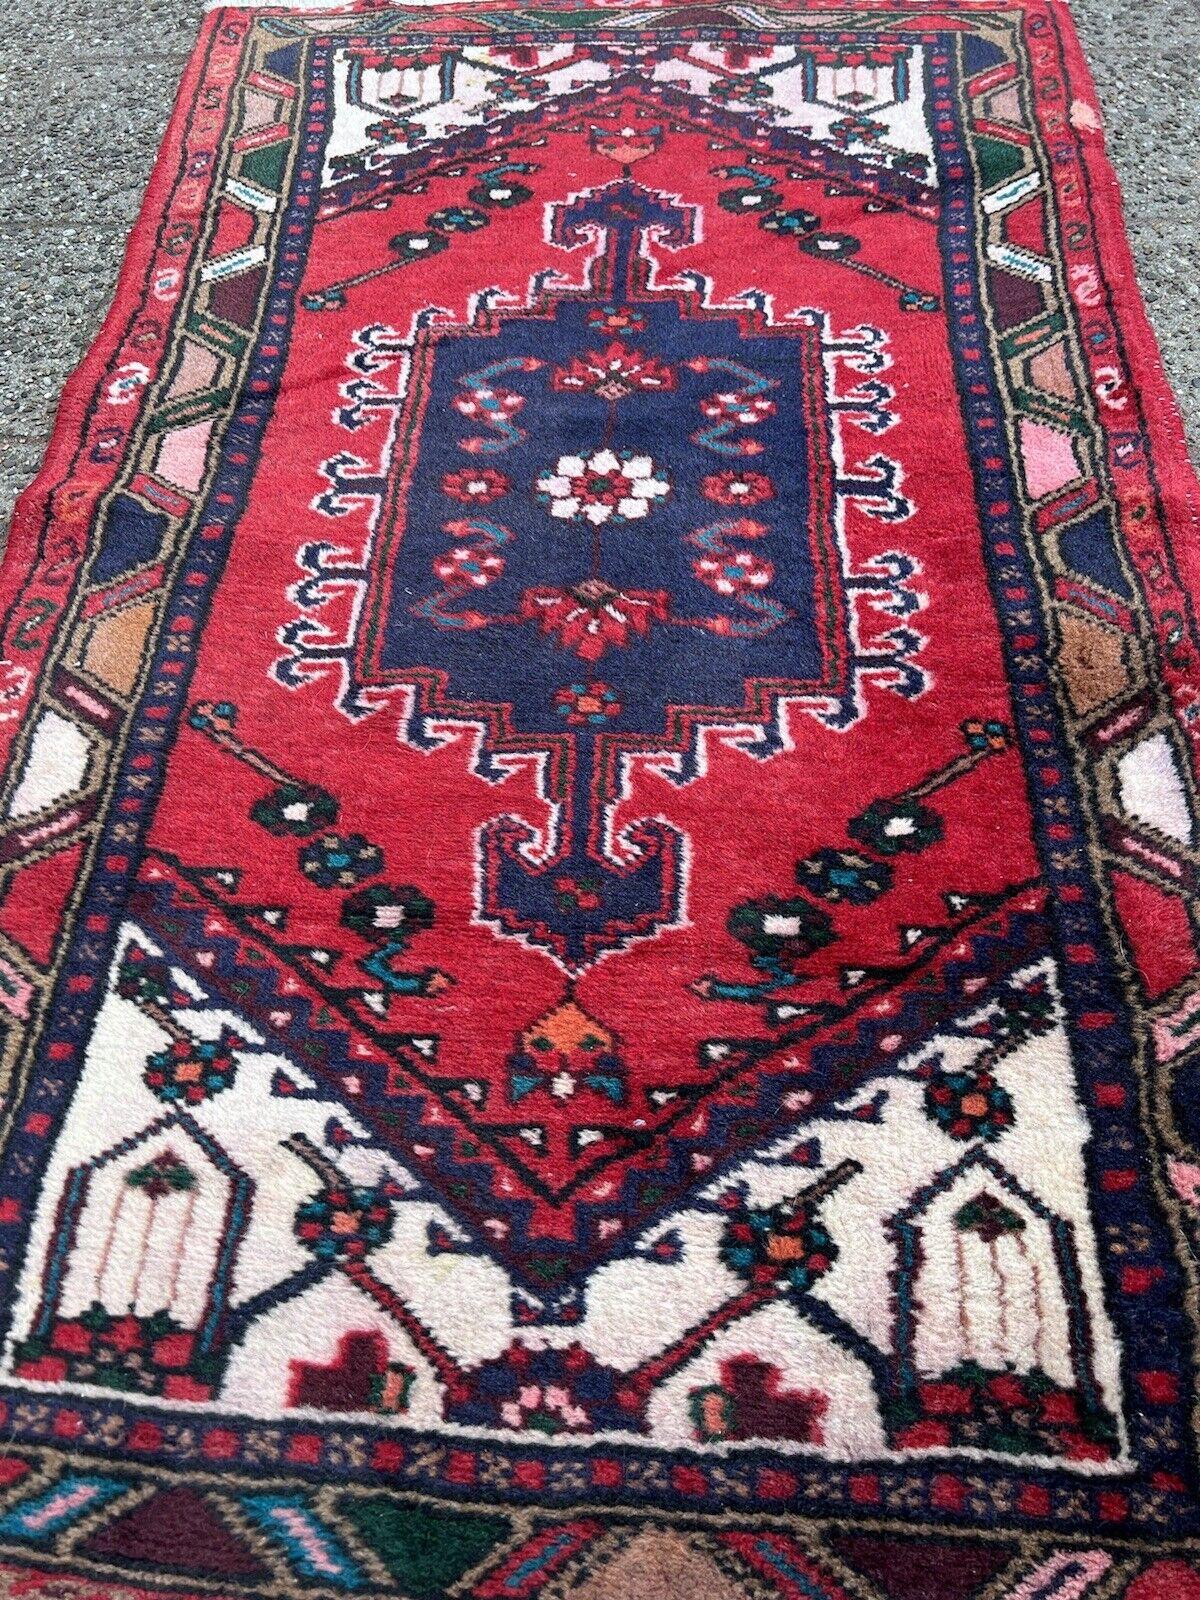 Handmade Vintage Persian Style Hamadan Rug 2.3' x 4', 1970s - 1S58 In Good Condition For Sale In Bordeaux, FR